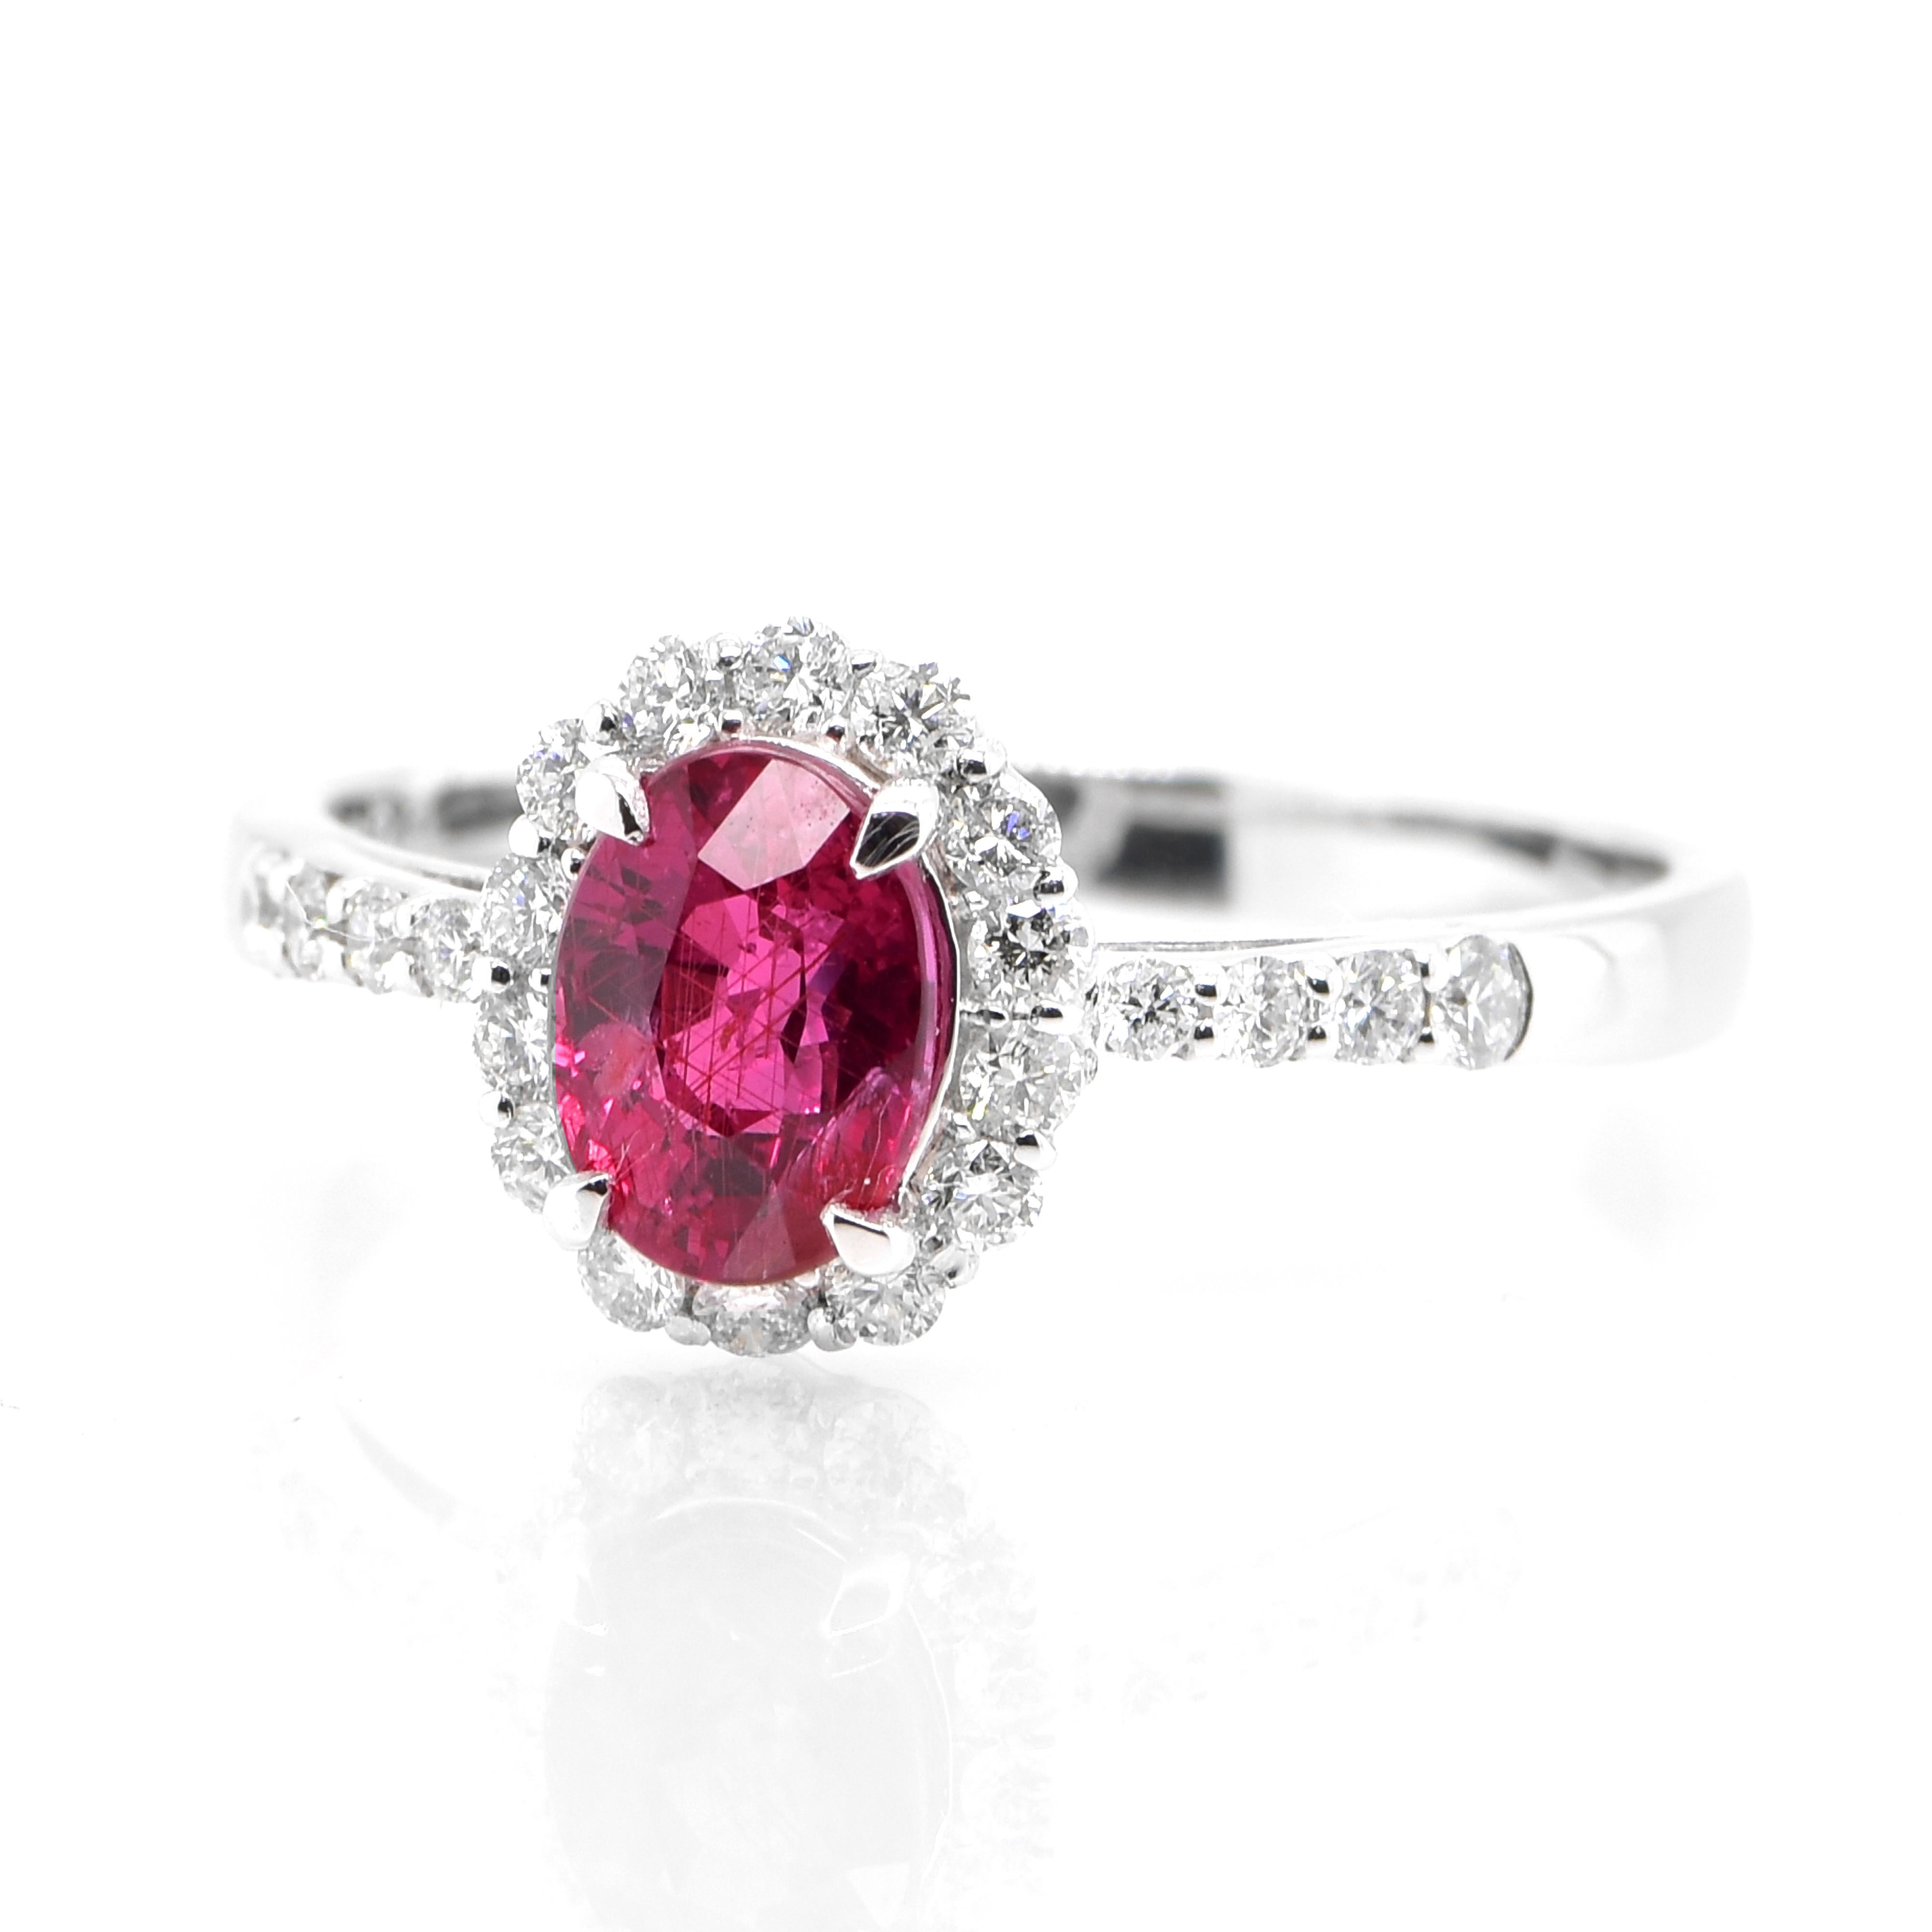 A beautiful Ring set in Platinum featuring a GIA Certified 1.07 Carat Natural, Untreated (No Heat) Ruby and 0.29 Carat Diamonds. Rubies are referred to as 